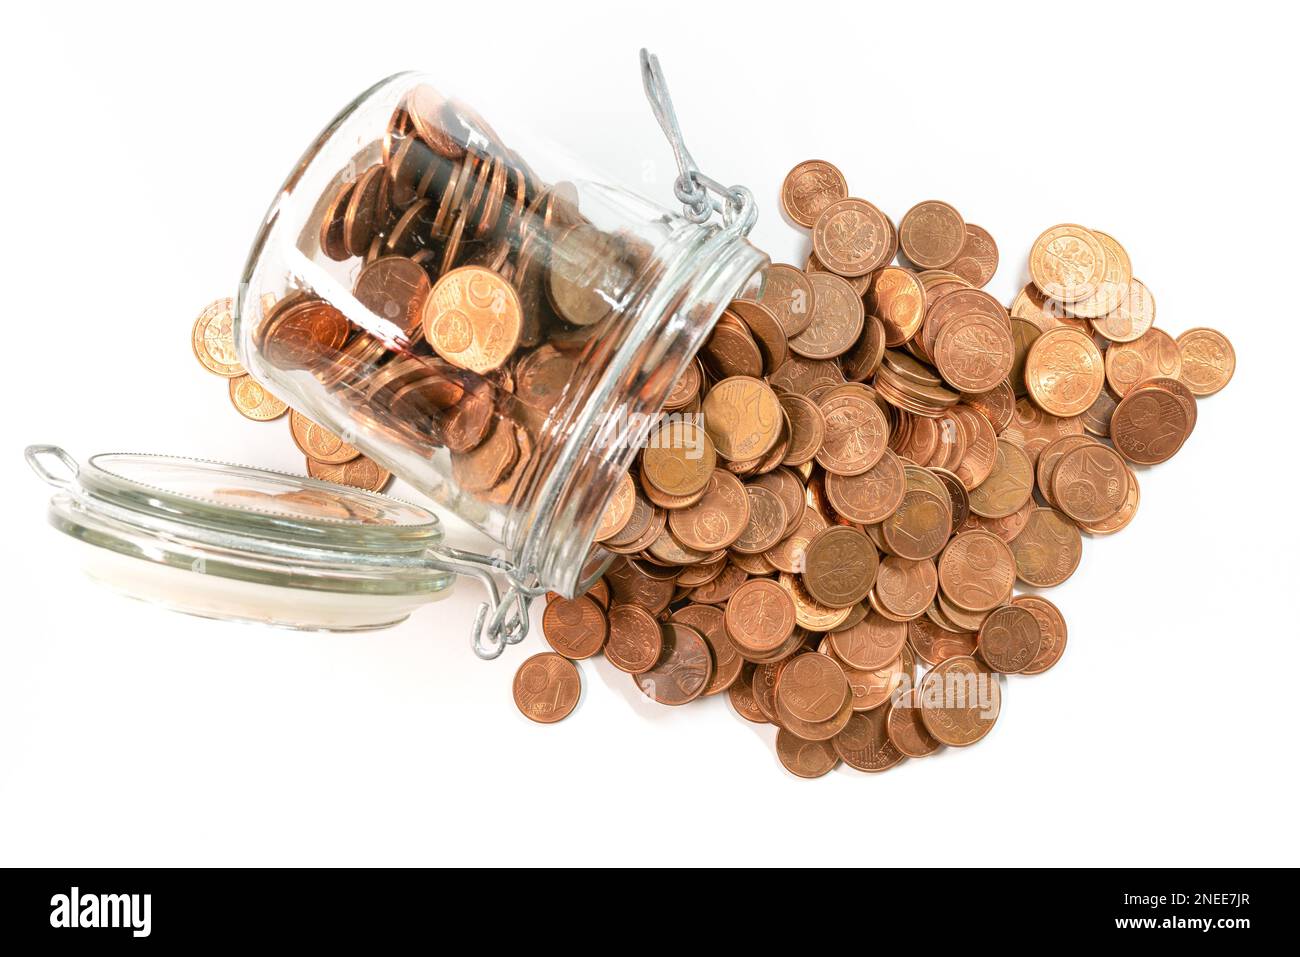 small change euro cent coins pouring out of glass jar isolated on white background, withdrawal of low denomination coins concept Stock Photo